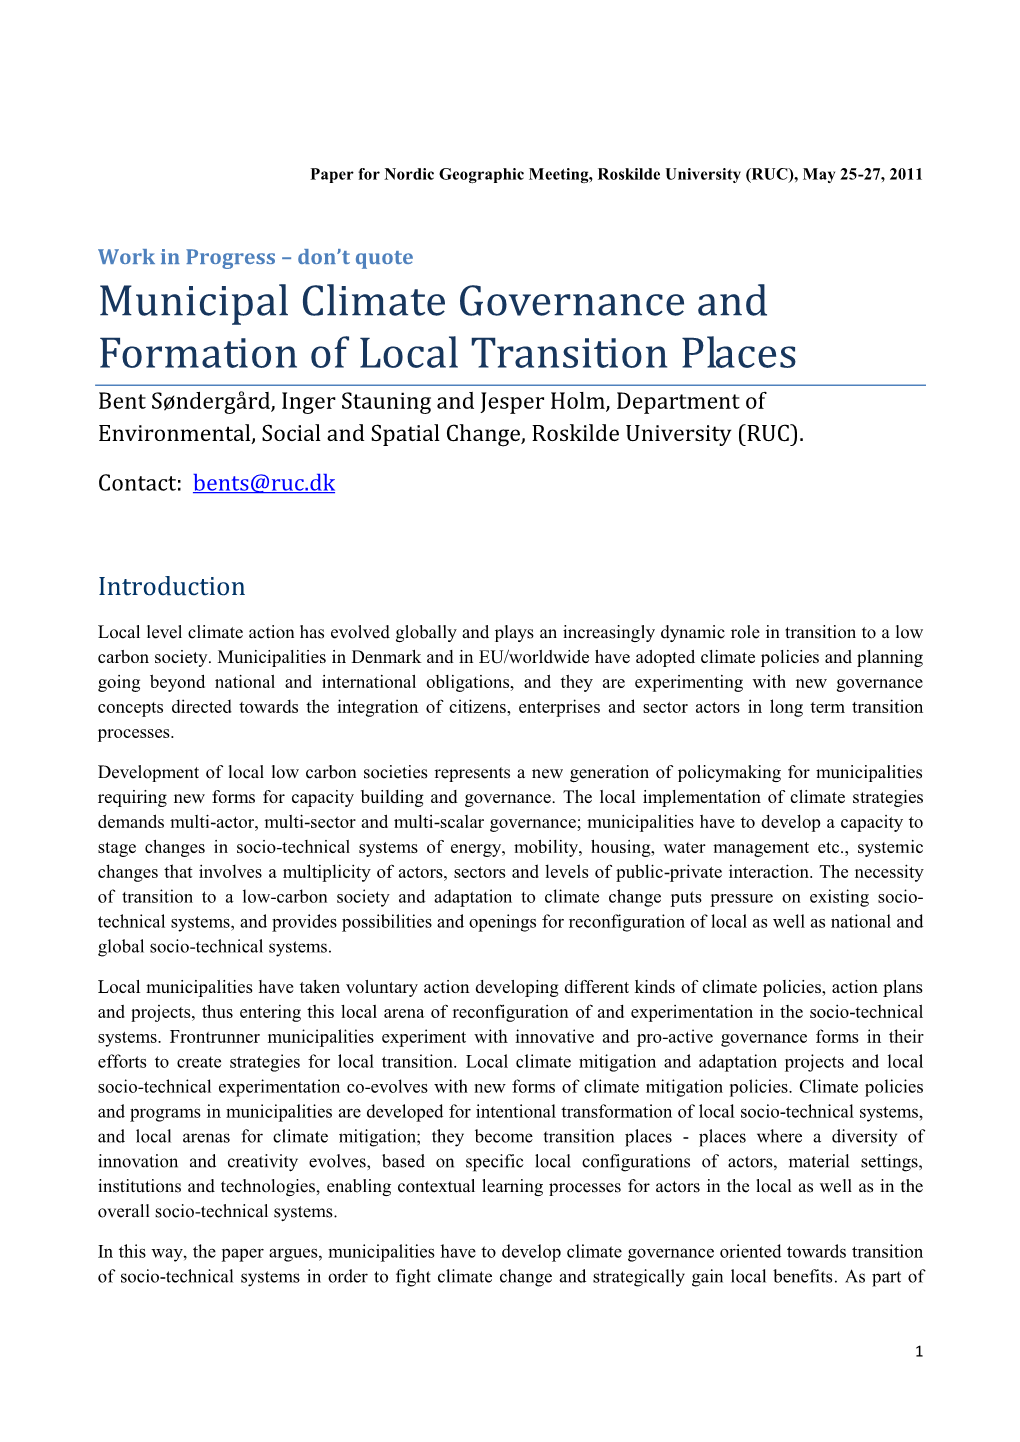 Municipal Climate Governance and Formation of Local Transition Places